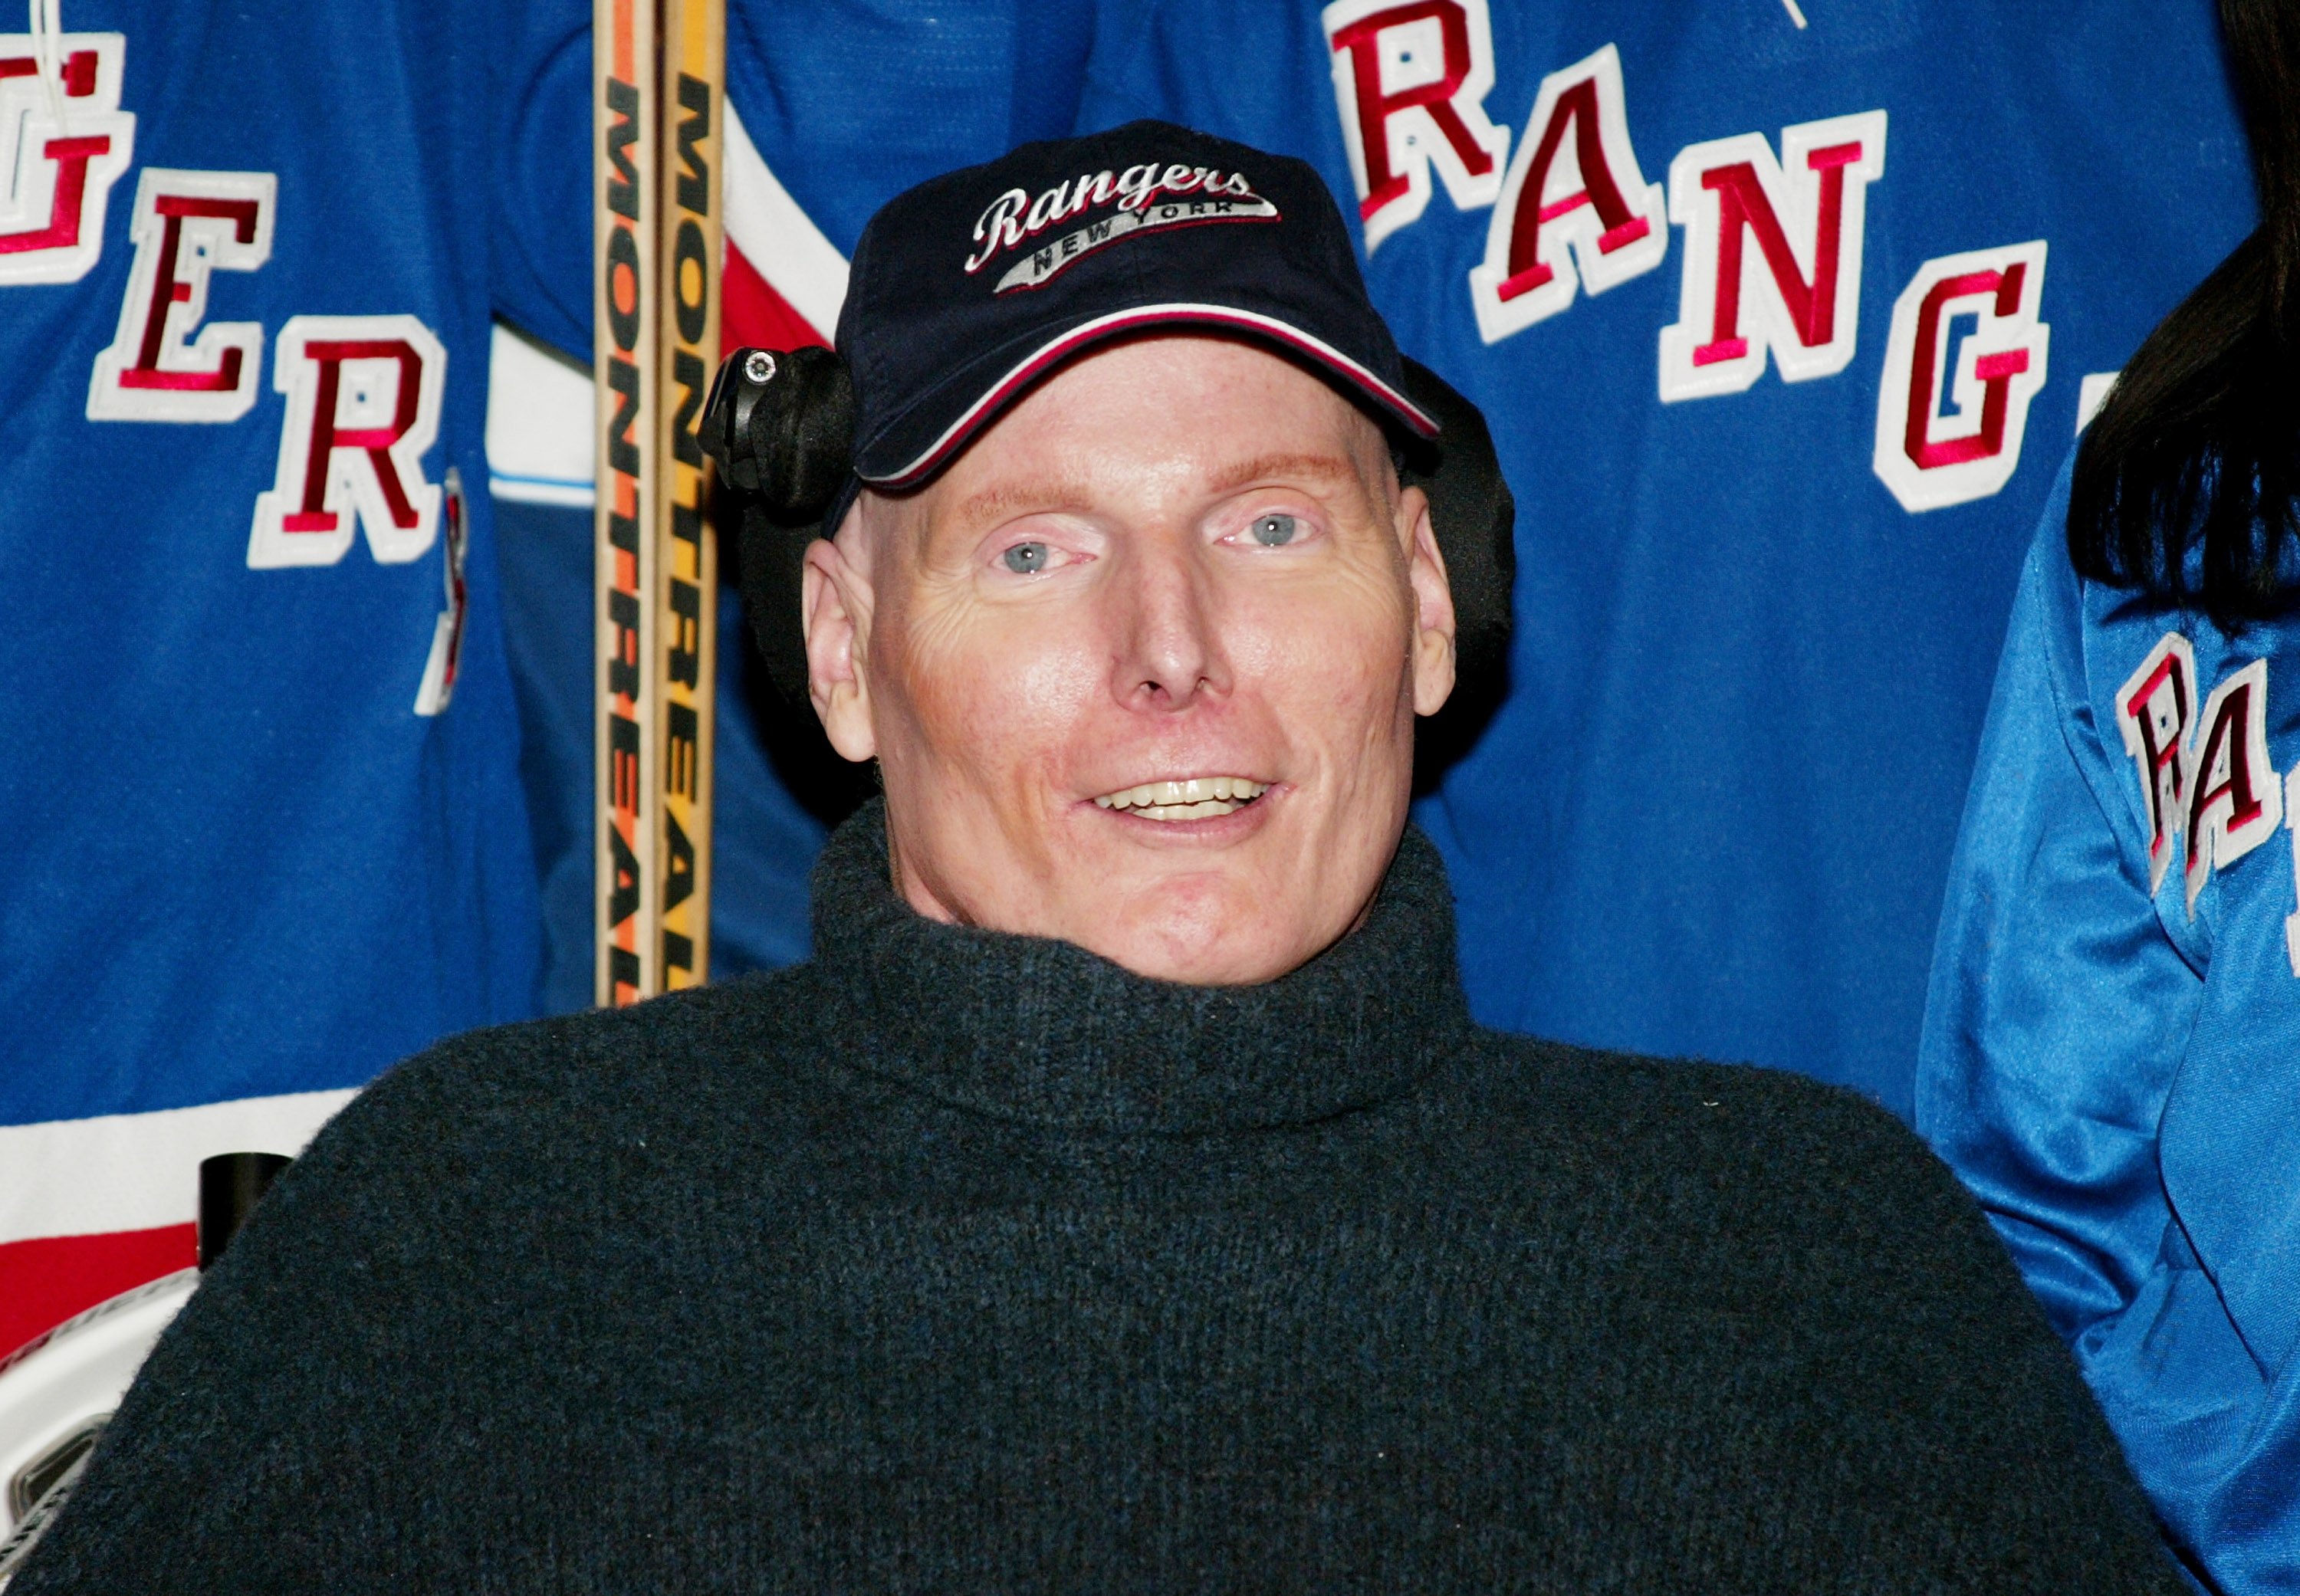 Christopher Reeve attends the SuperSkate VI charity hockey event benefiting the Rangers Cheering For Children and Christopher Reeve Paralysis Foundation charities on January 25, 2004 in New York City. | Photo: Getty Images